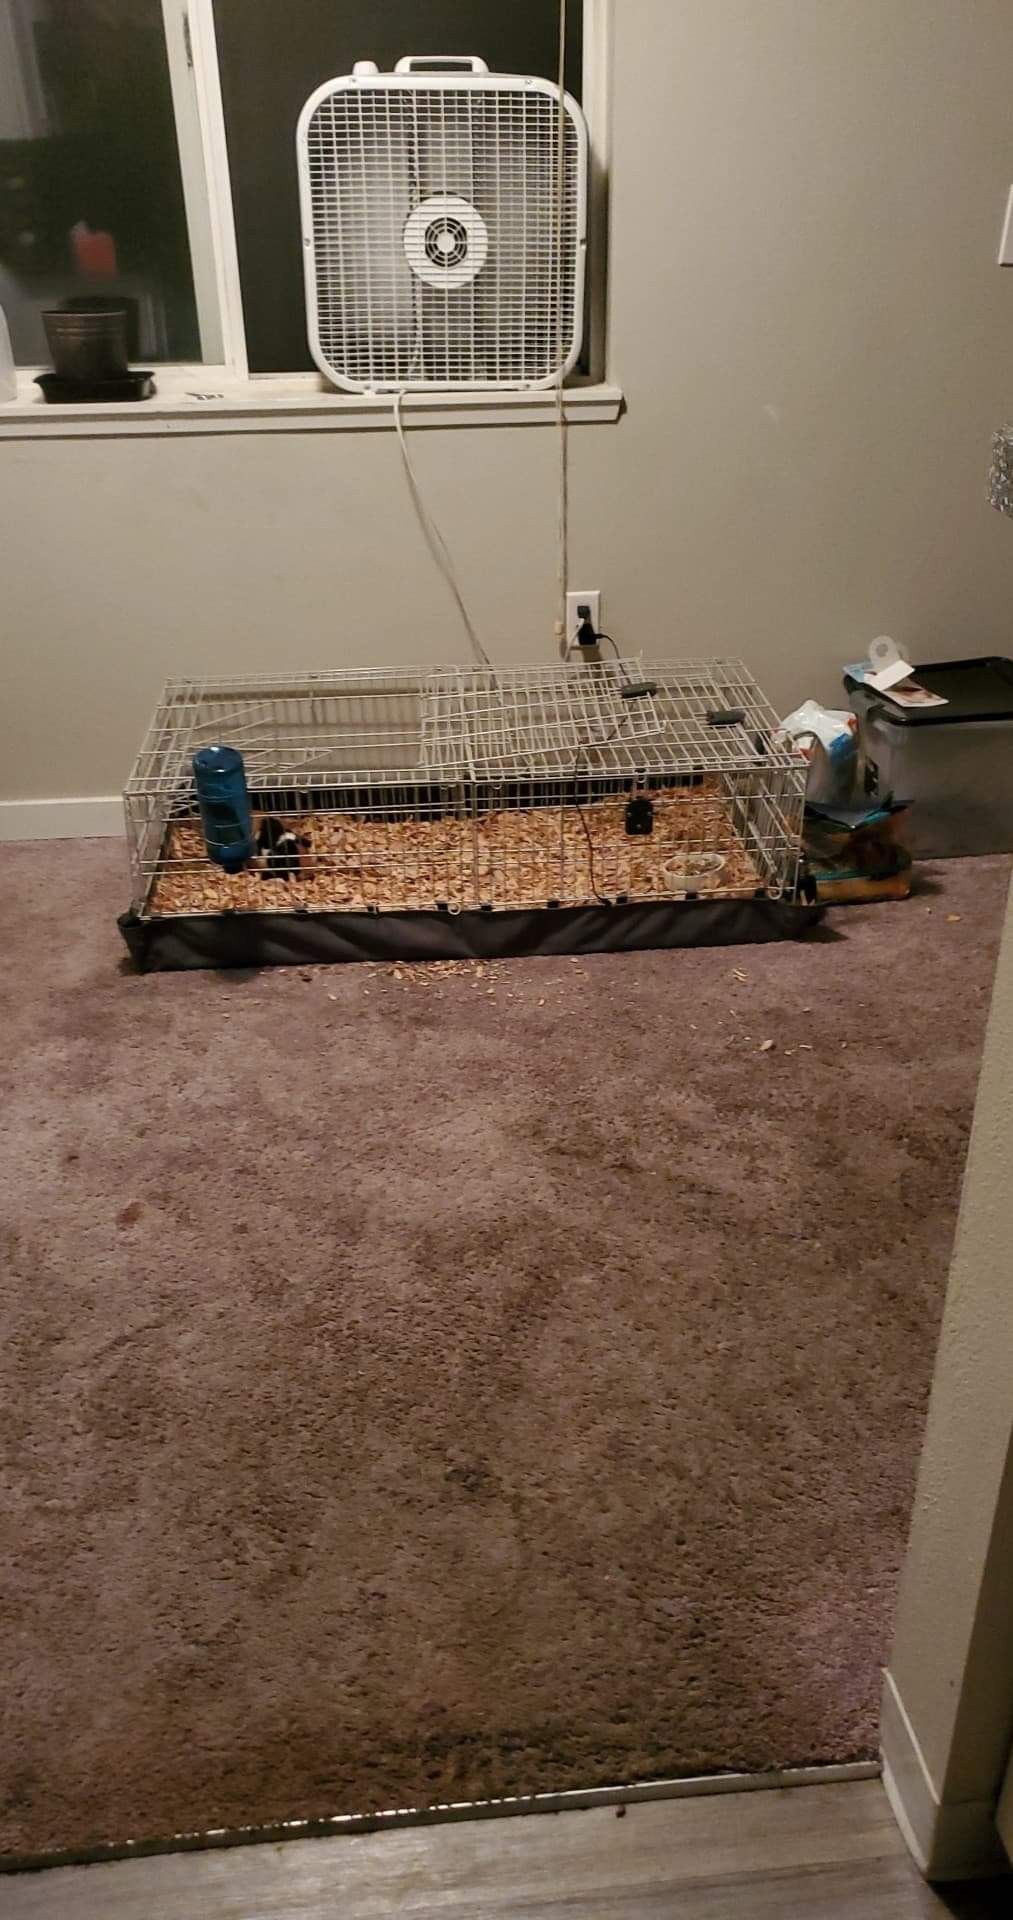 Ginuea pig cage and bottle